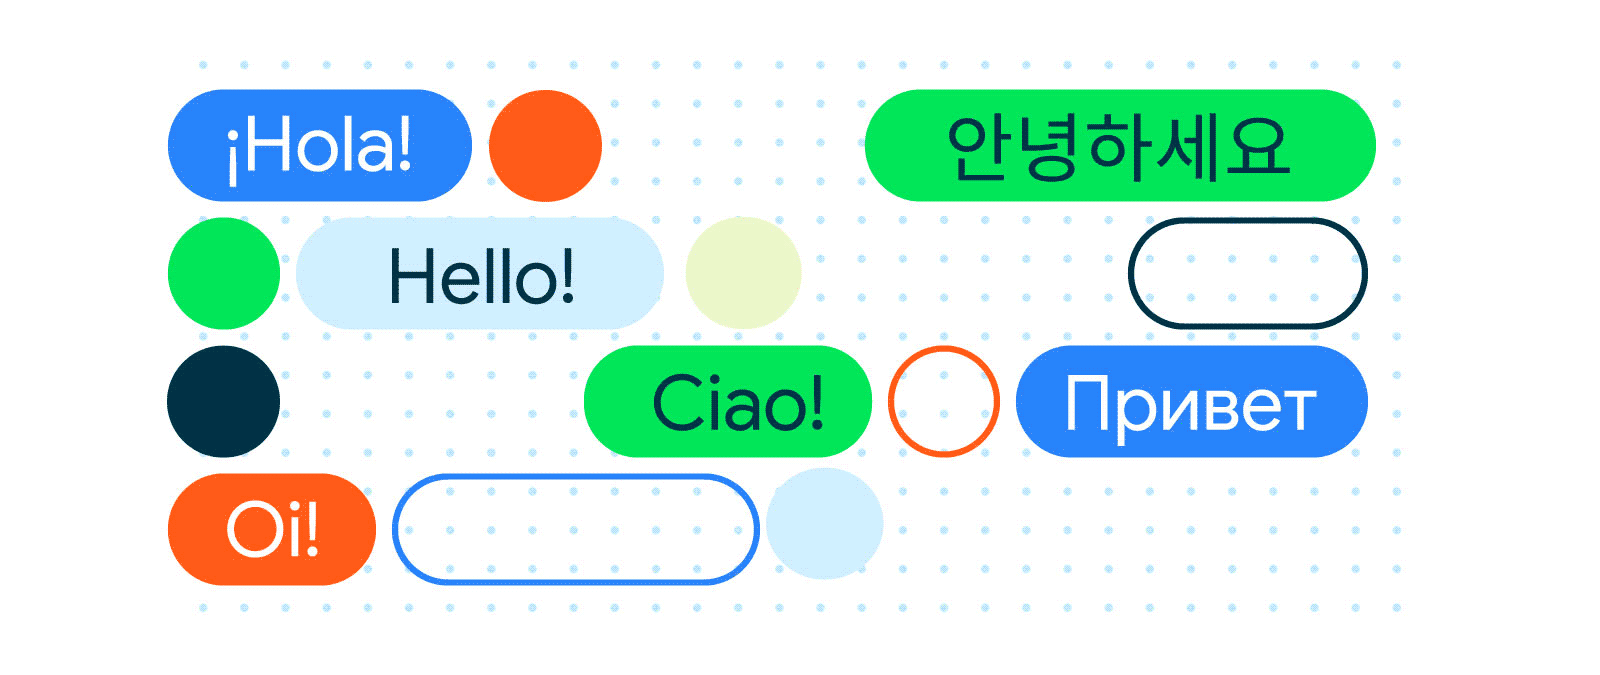 Moving image of text bubbles with 'hello' in different languages appear (Spanish, French, Korean, English, Greek, Chinese, Italian, Russian, Portuguese, Tamil)